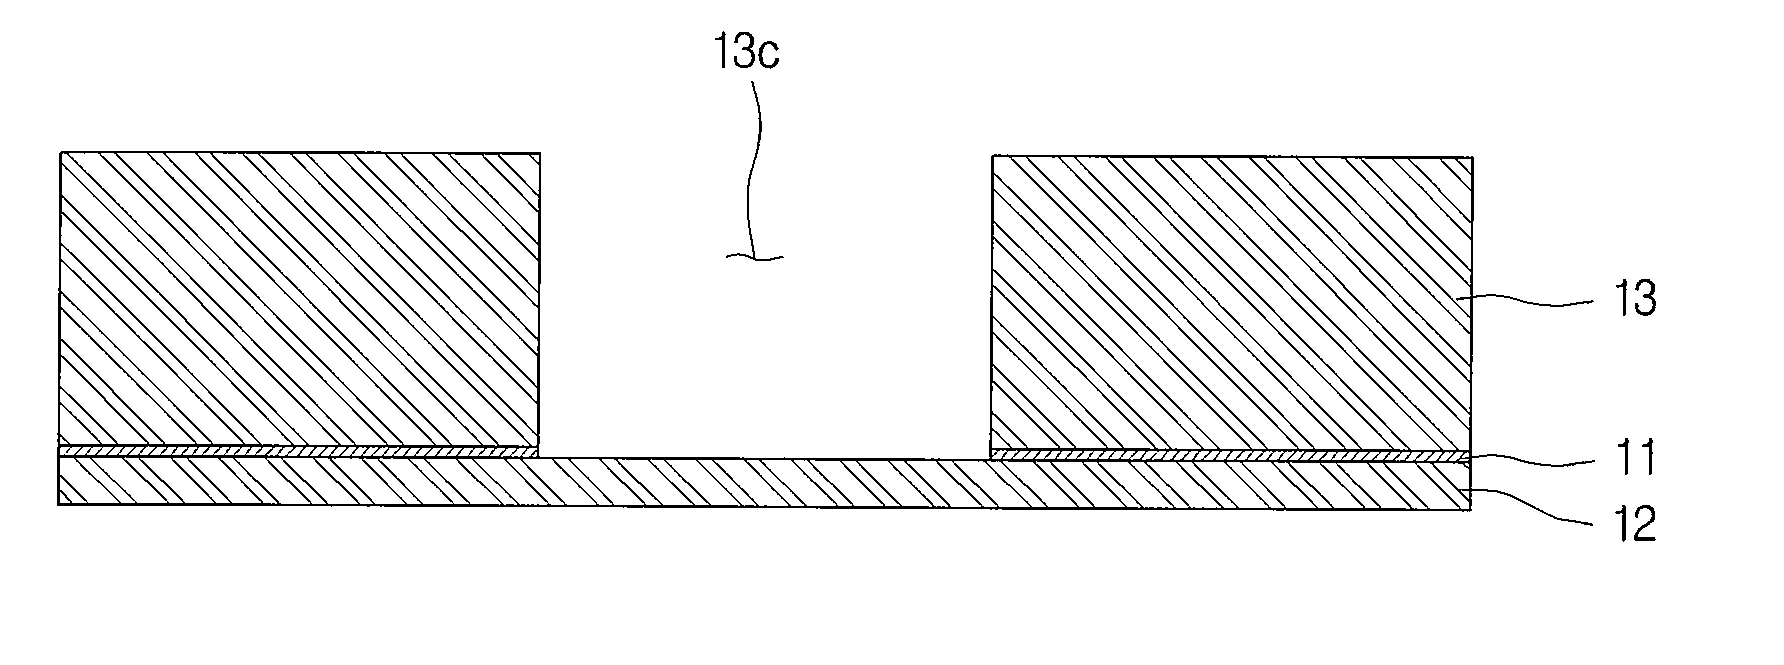 Processing method for soi substrate